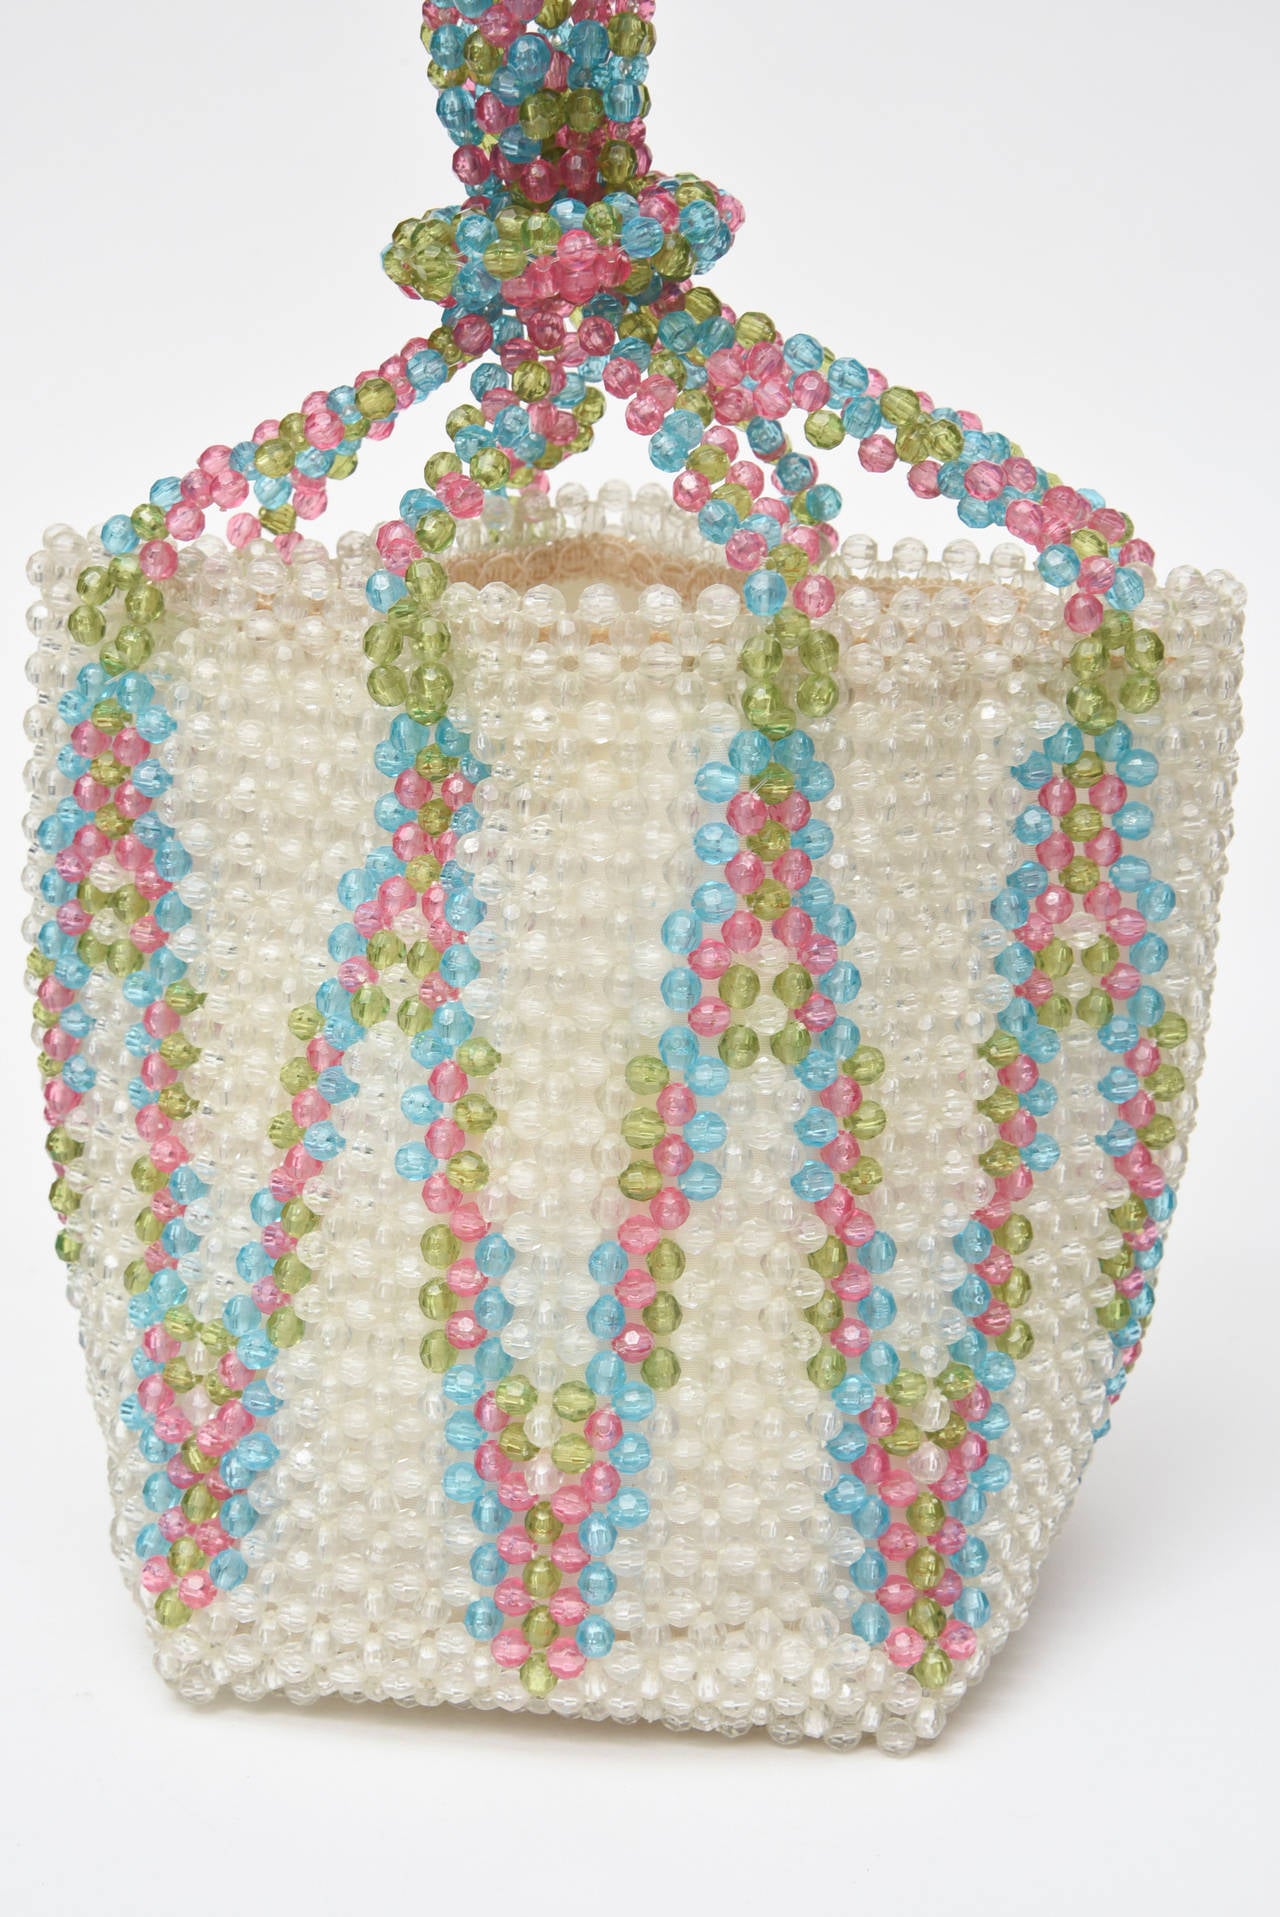 The colors of glorious summer time and resort dreams are abundant in this pink, turquoise and chartreuse chic handbag that is Italian and of the great work of Coppola e Toppo. It consists of plastic beads of a graphic design set against a white